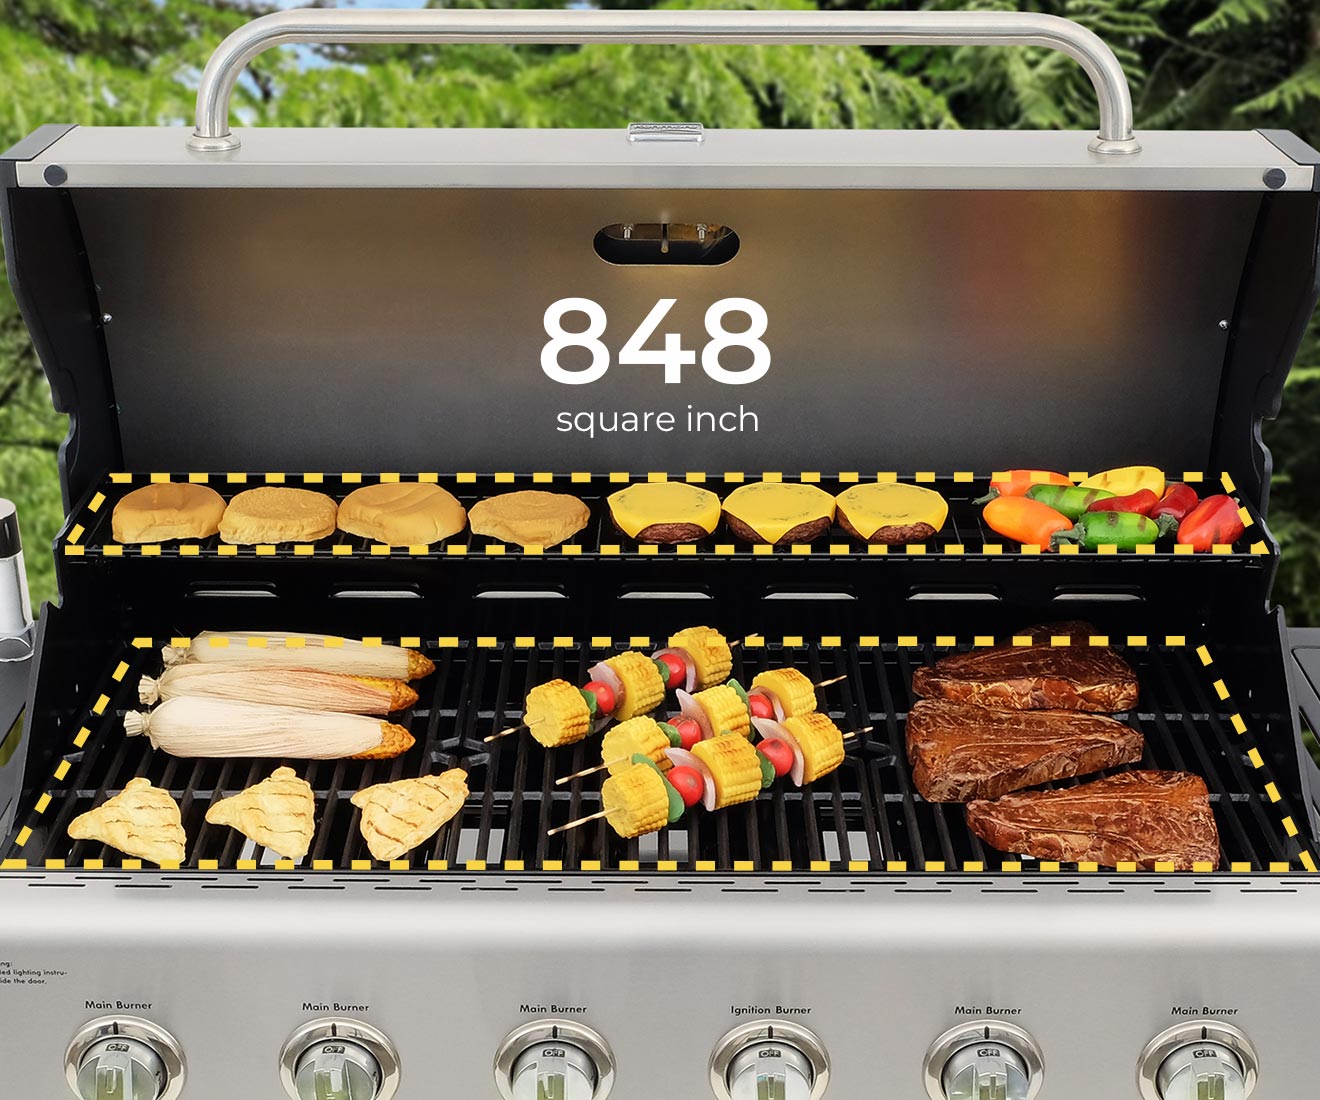 Kenmore 6-Burner Gas Grill with Side Burner PG-40611SOL Stainless Steel Large Cooking Surface Area